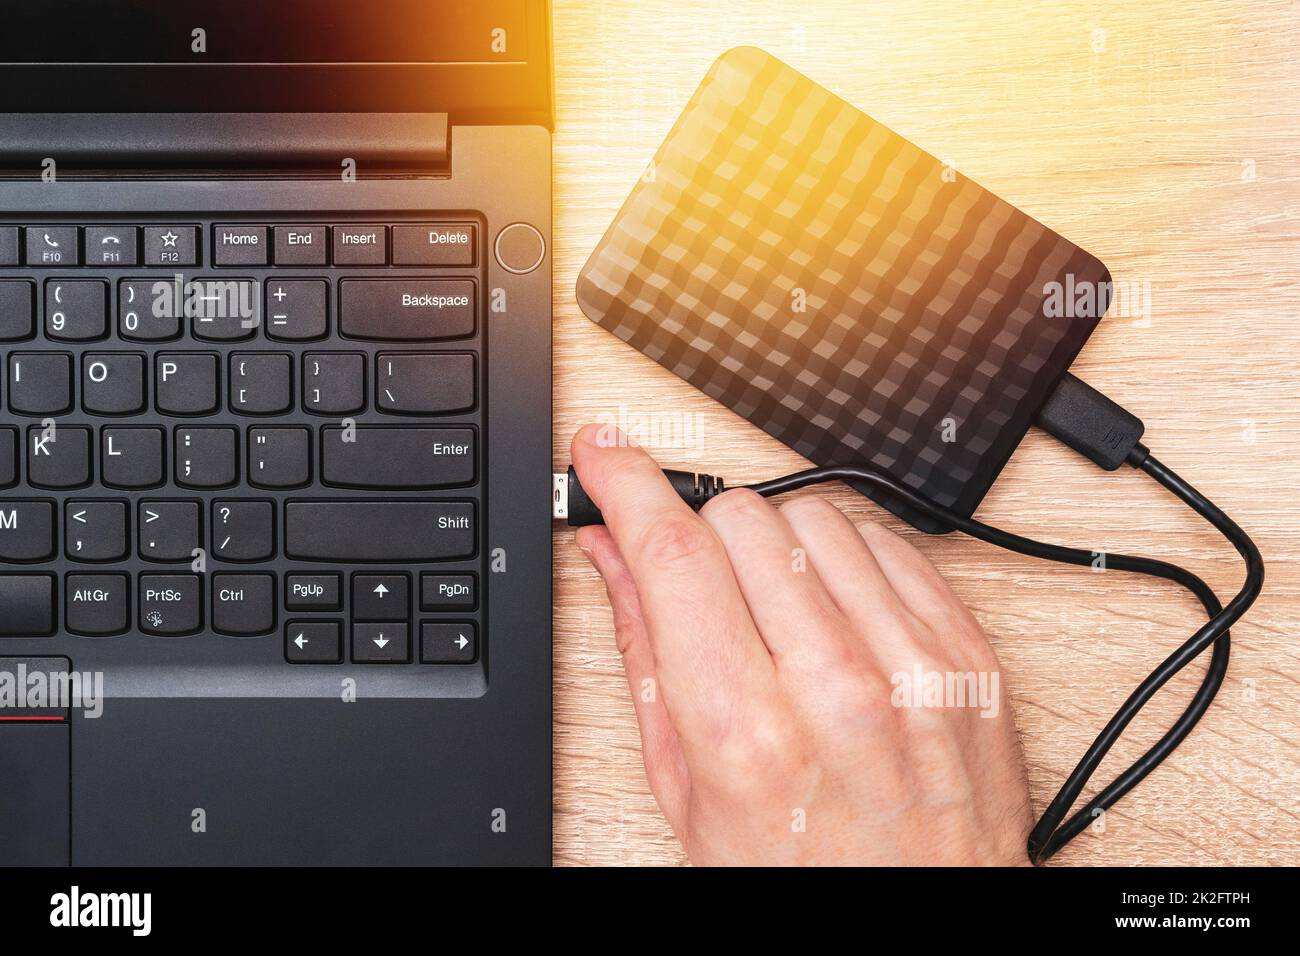 Plugging portable hdd into laptop USB slot Stock Photo